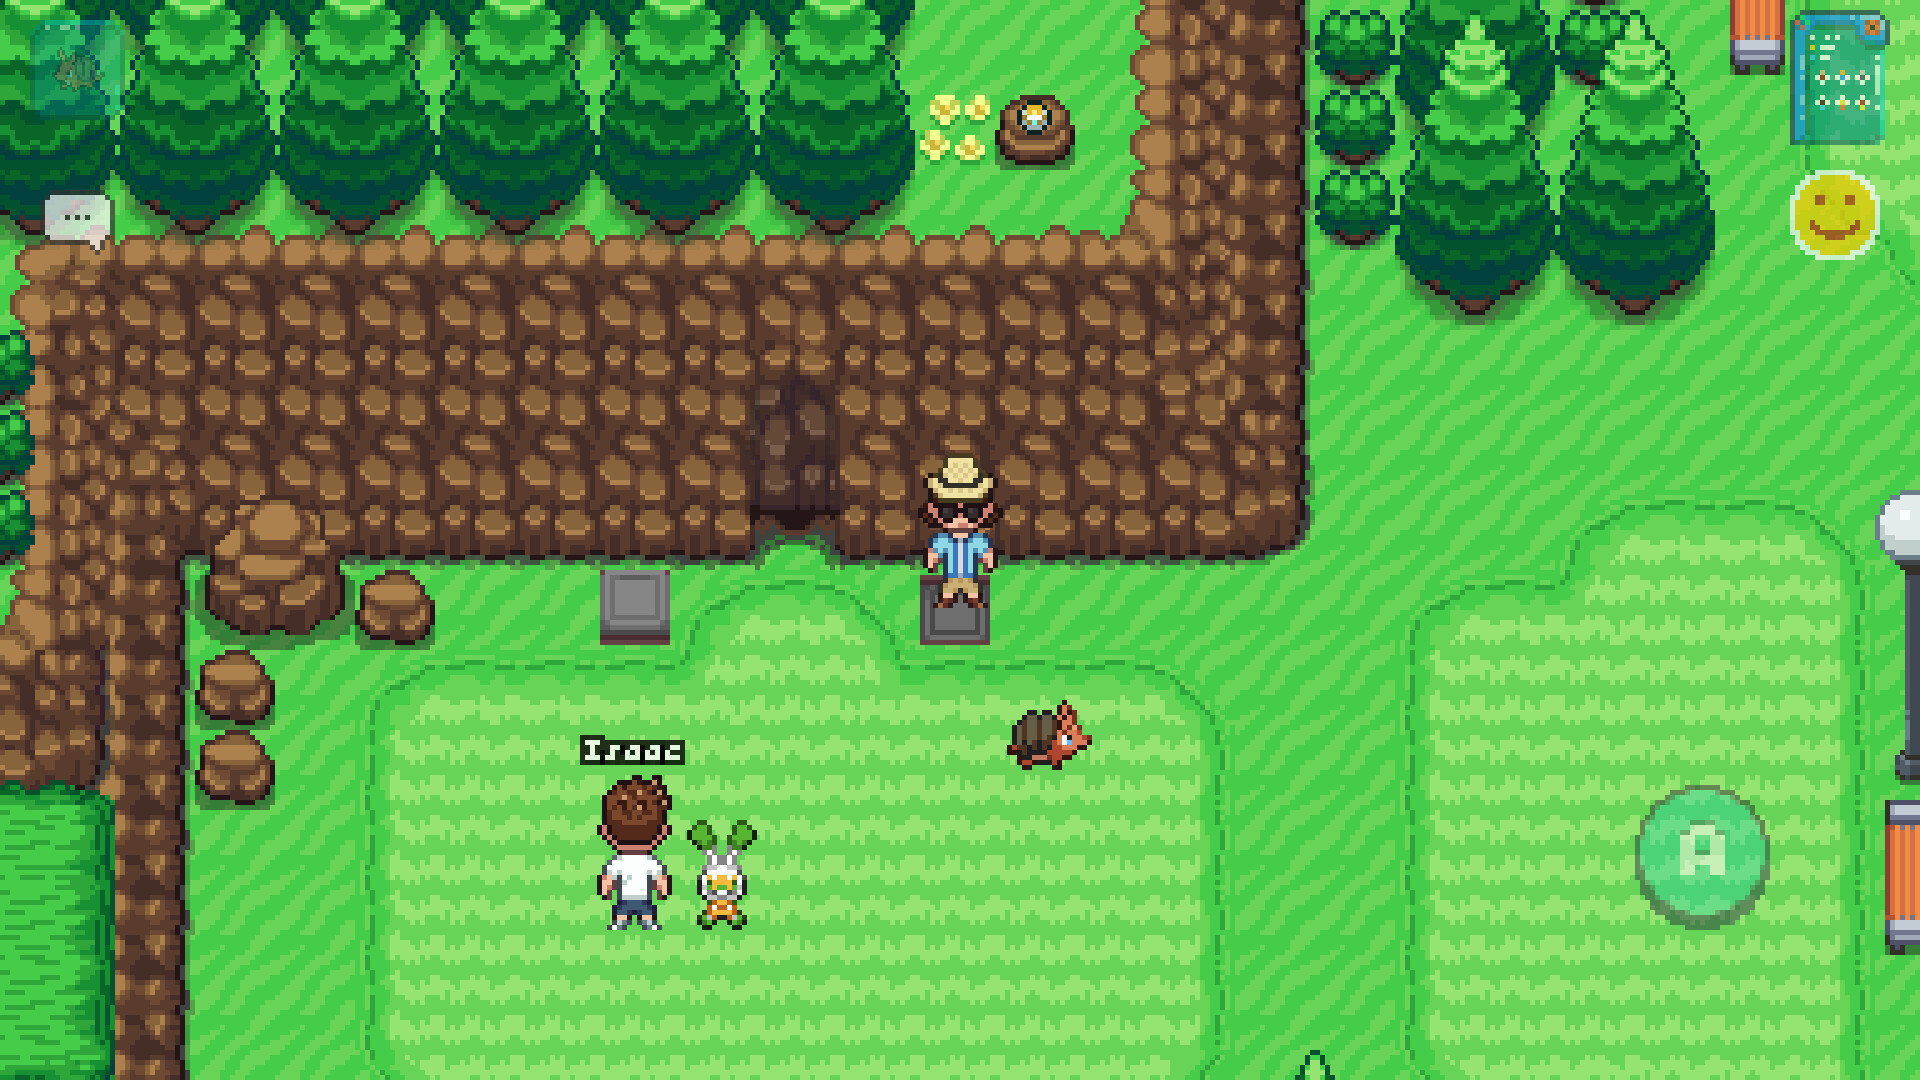 Duel Revolution is an indie Pokemon-like MMORPG for PC and mobile